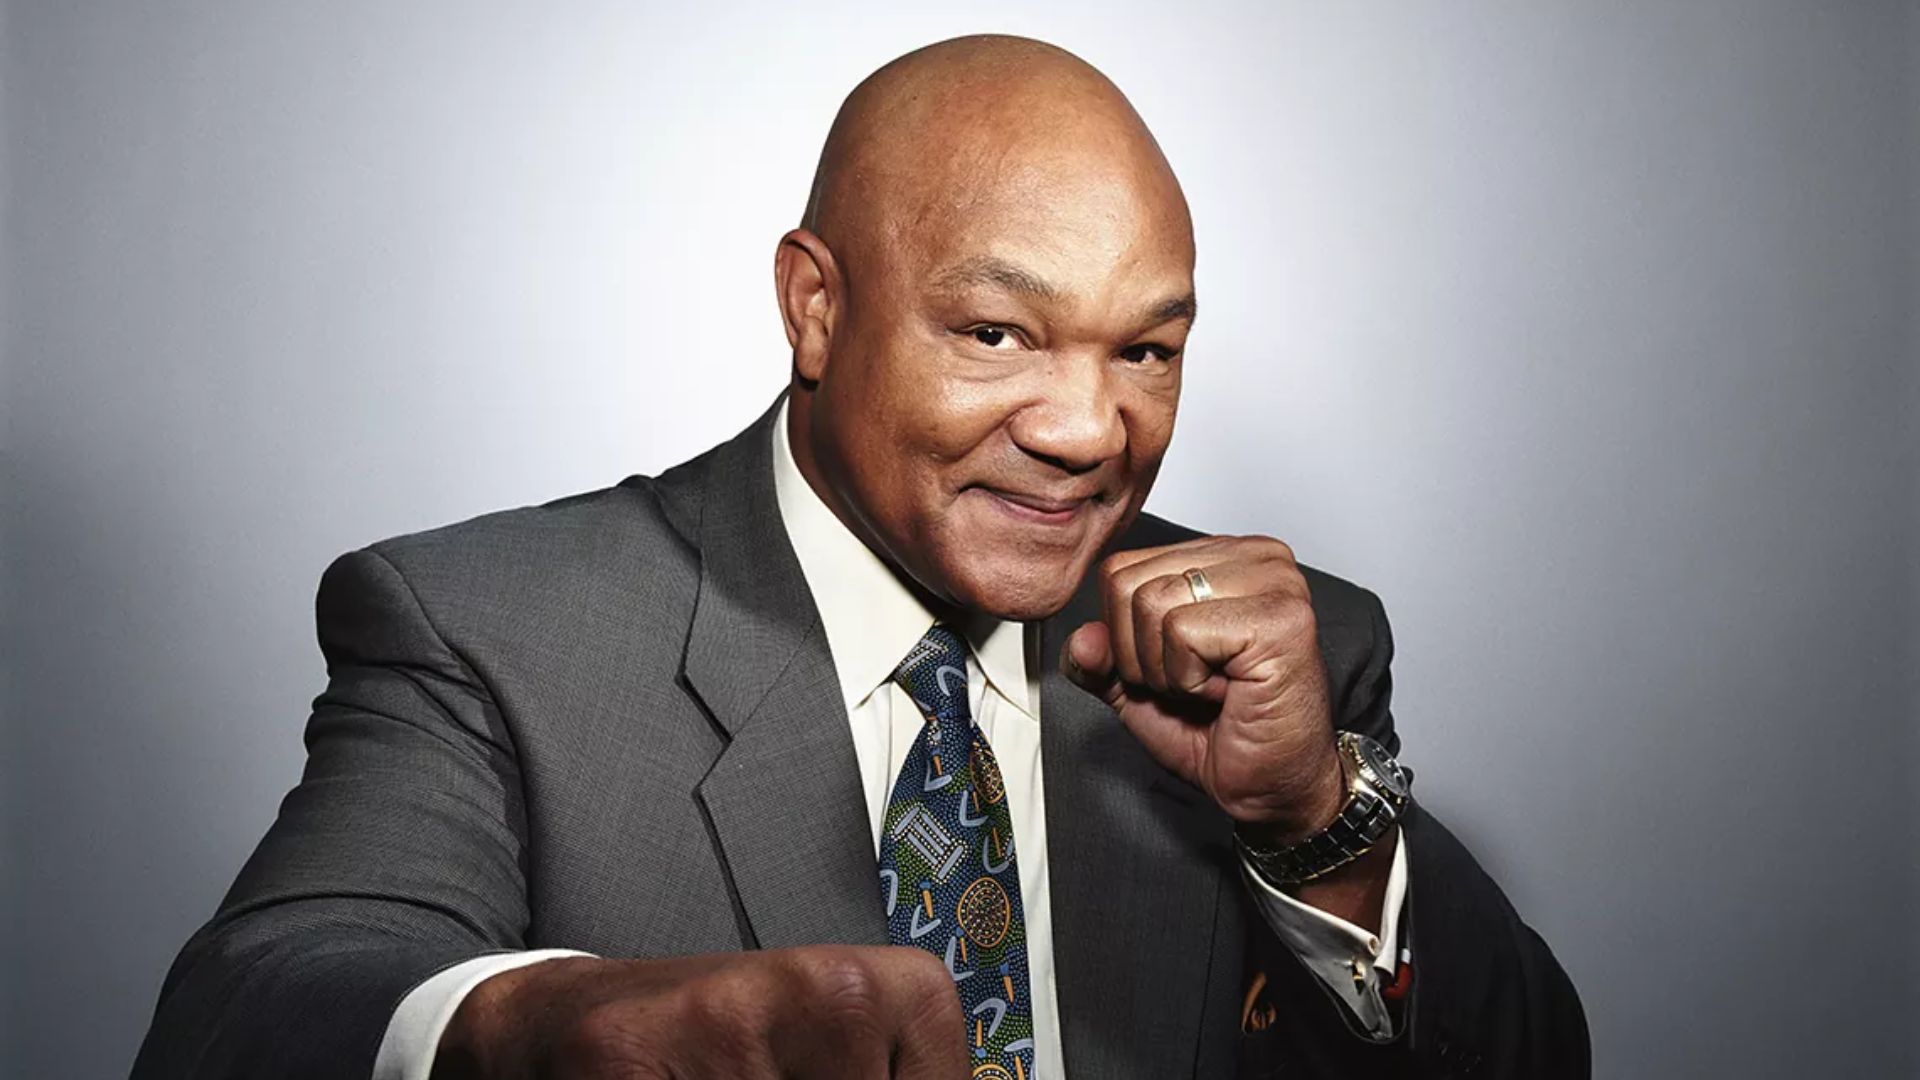 George Foreman In Boxing Stance